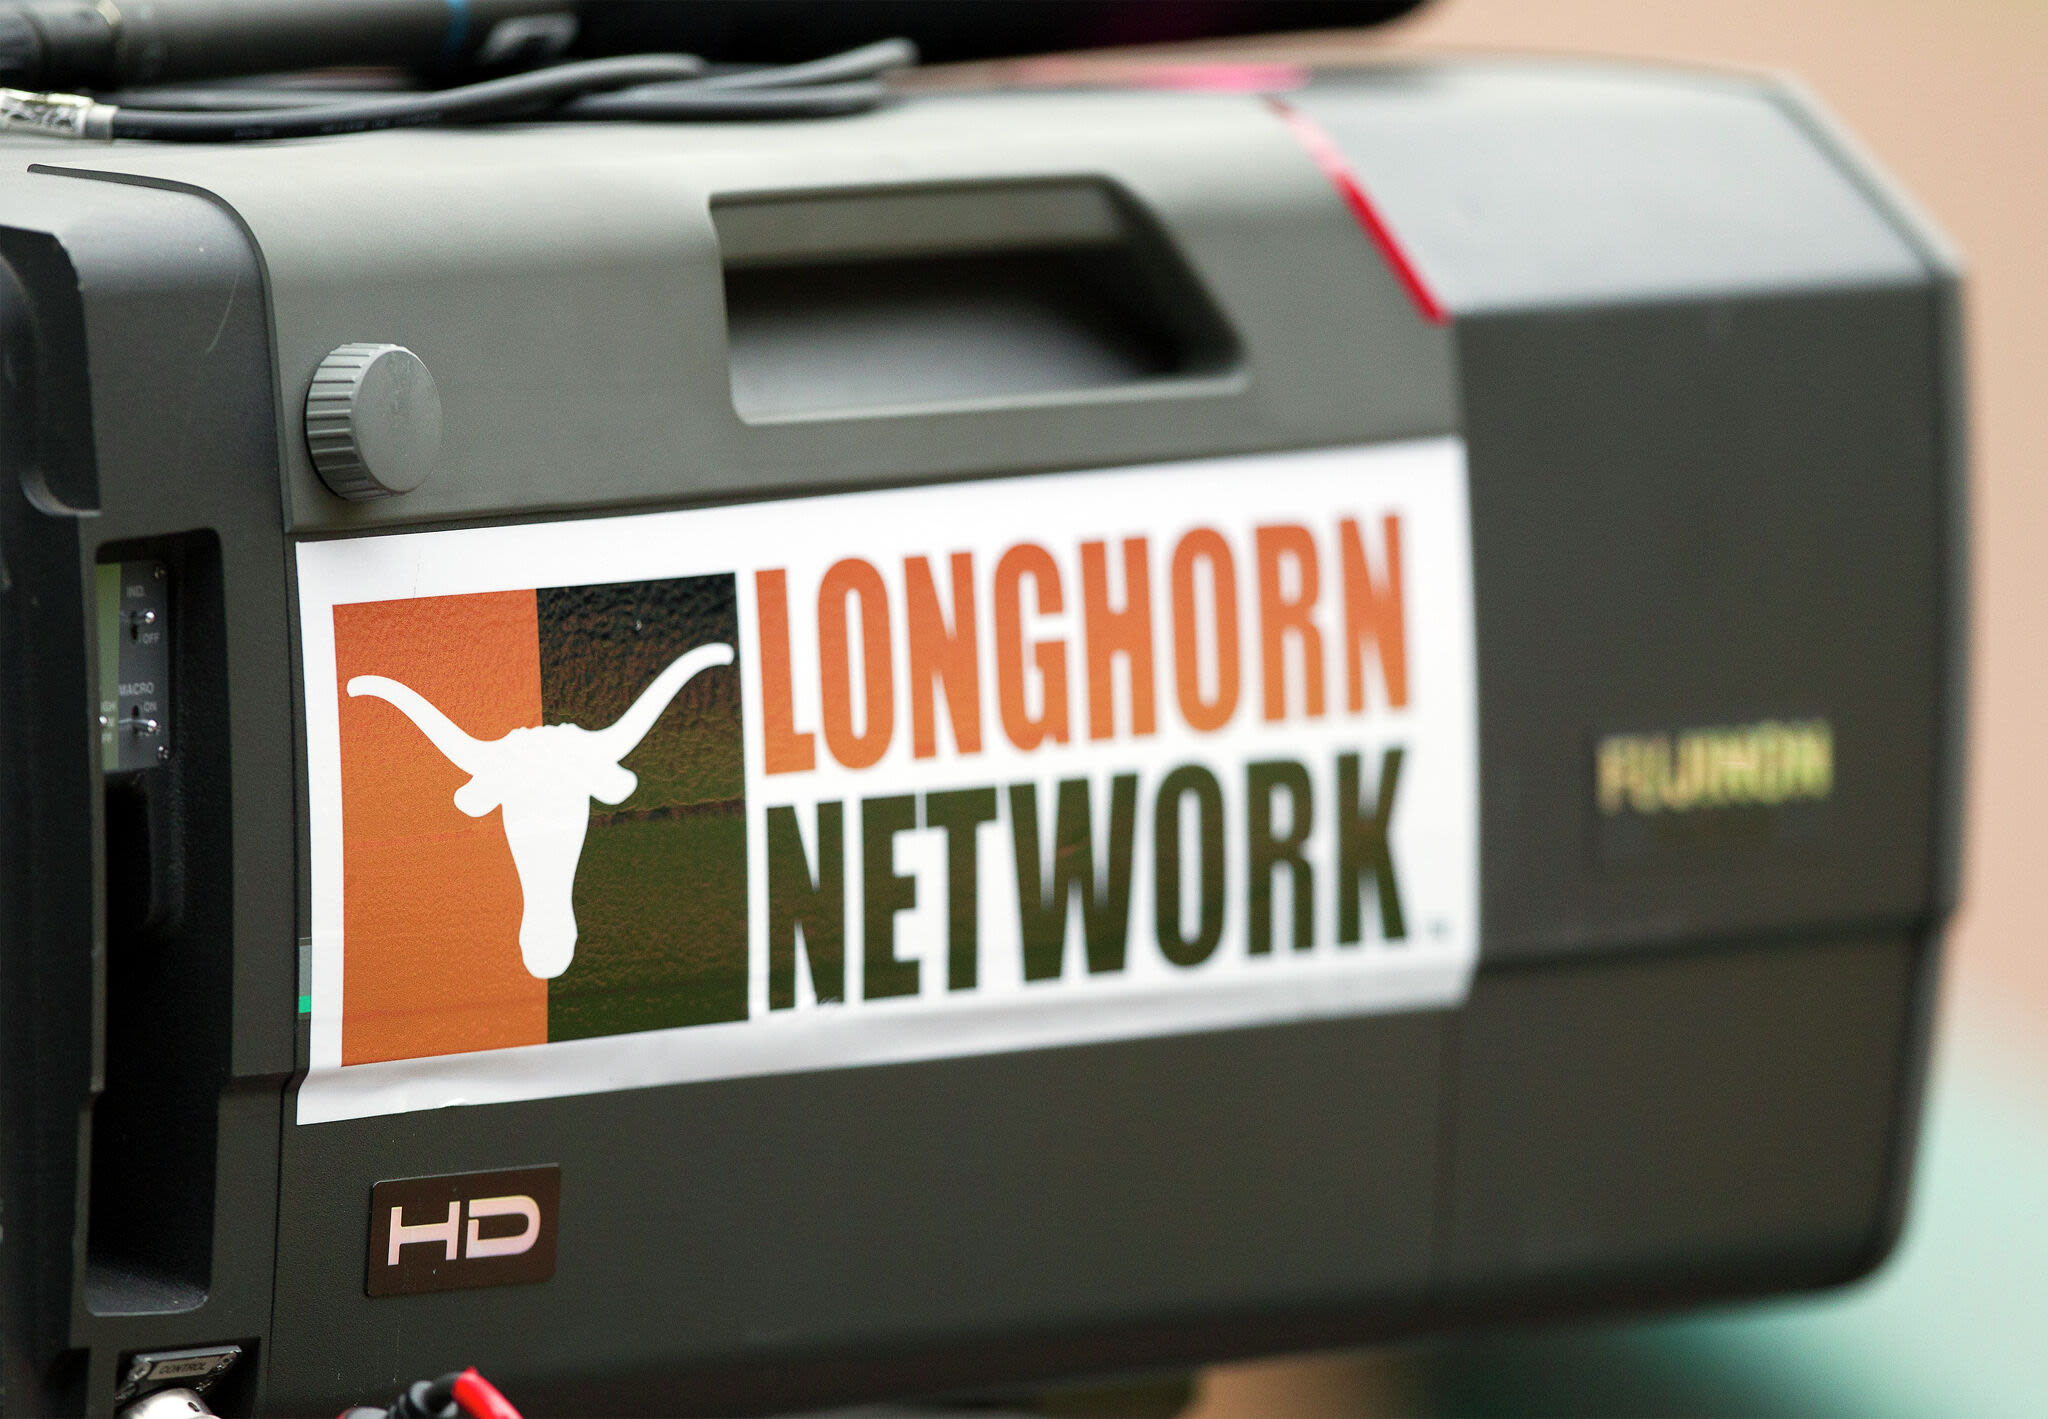 Longhorn Network will continue to live on...line